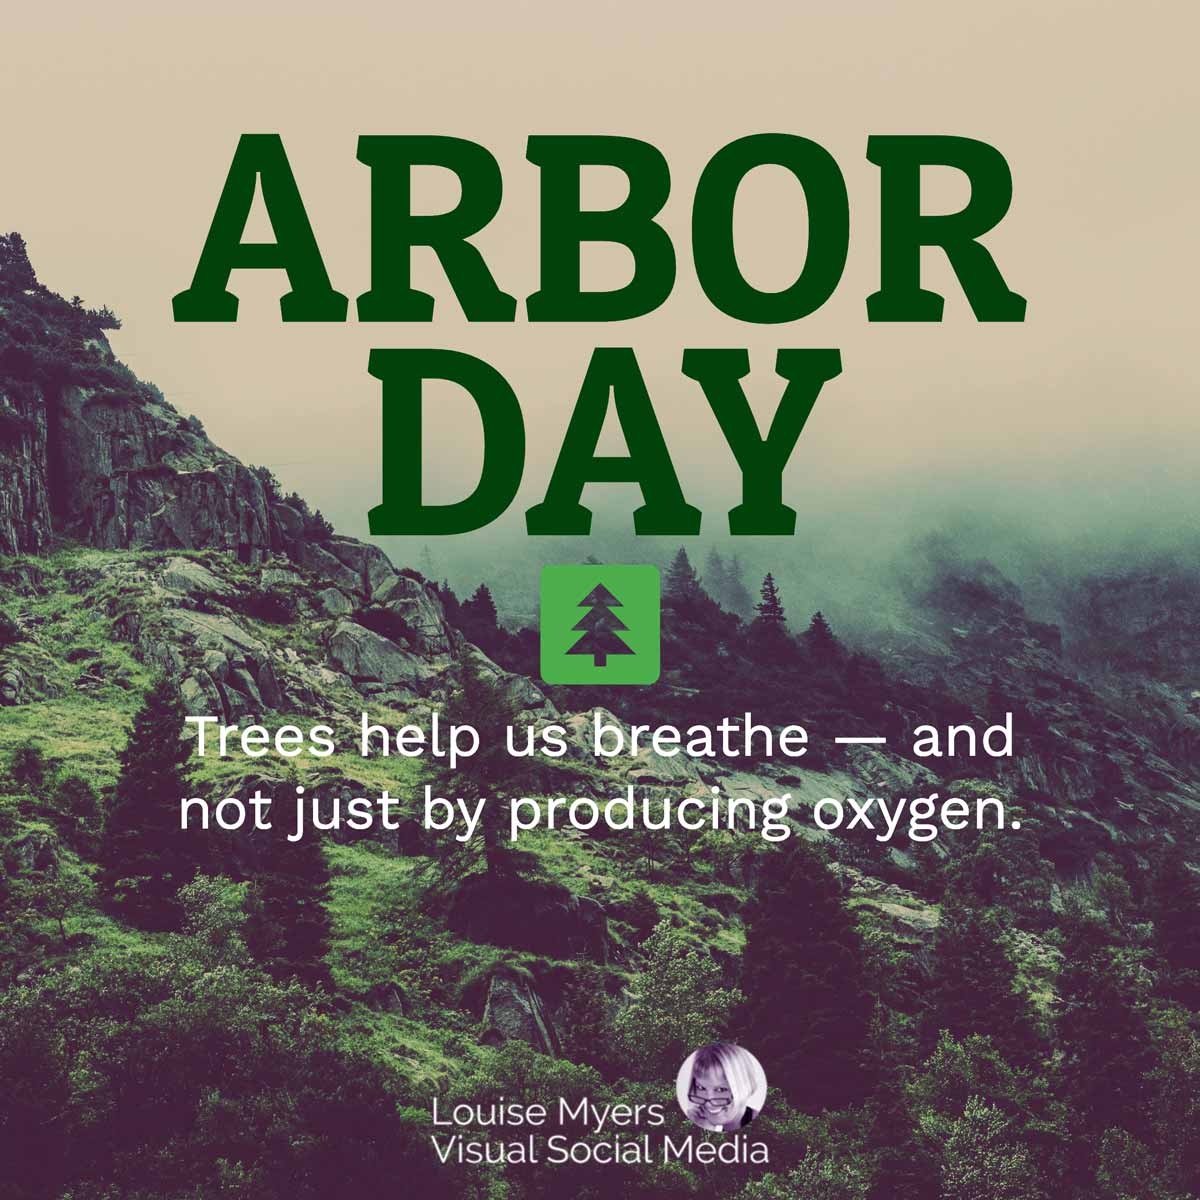 moutainside covered in trees says arbor day, trees help us breathe.